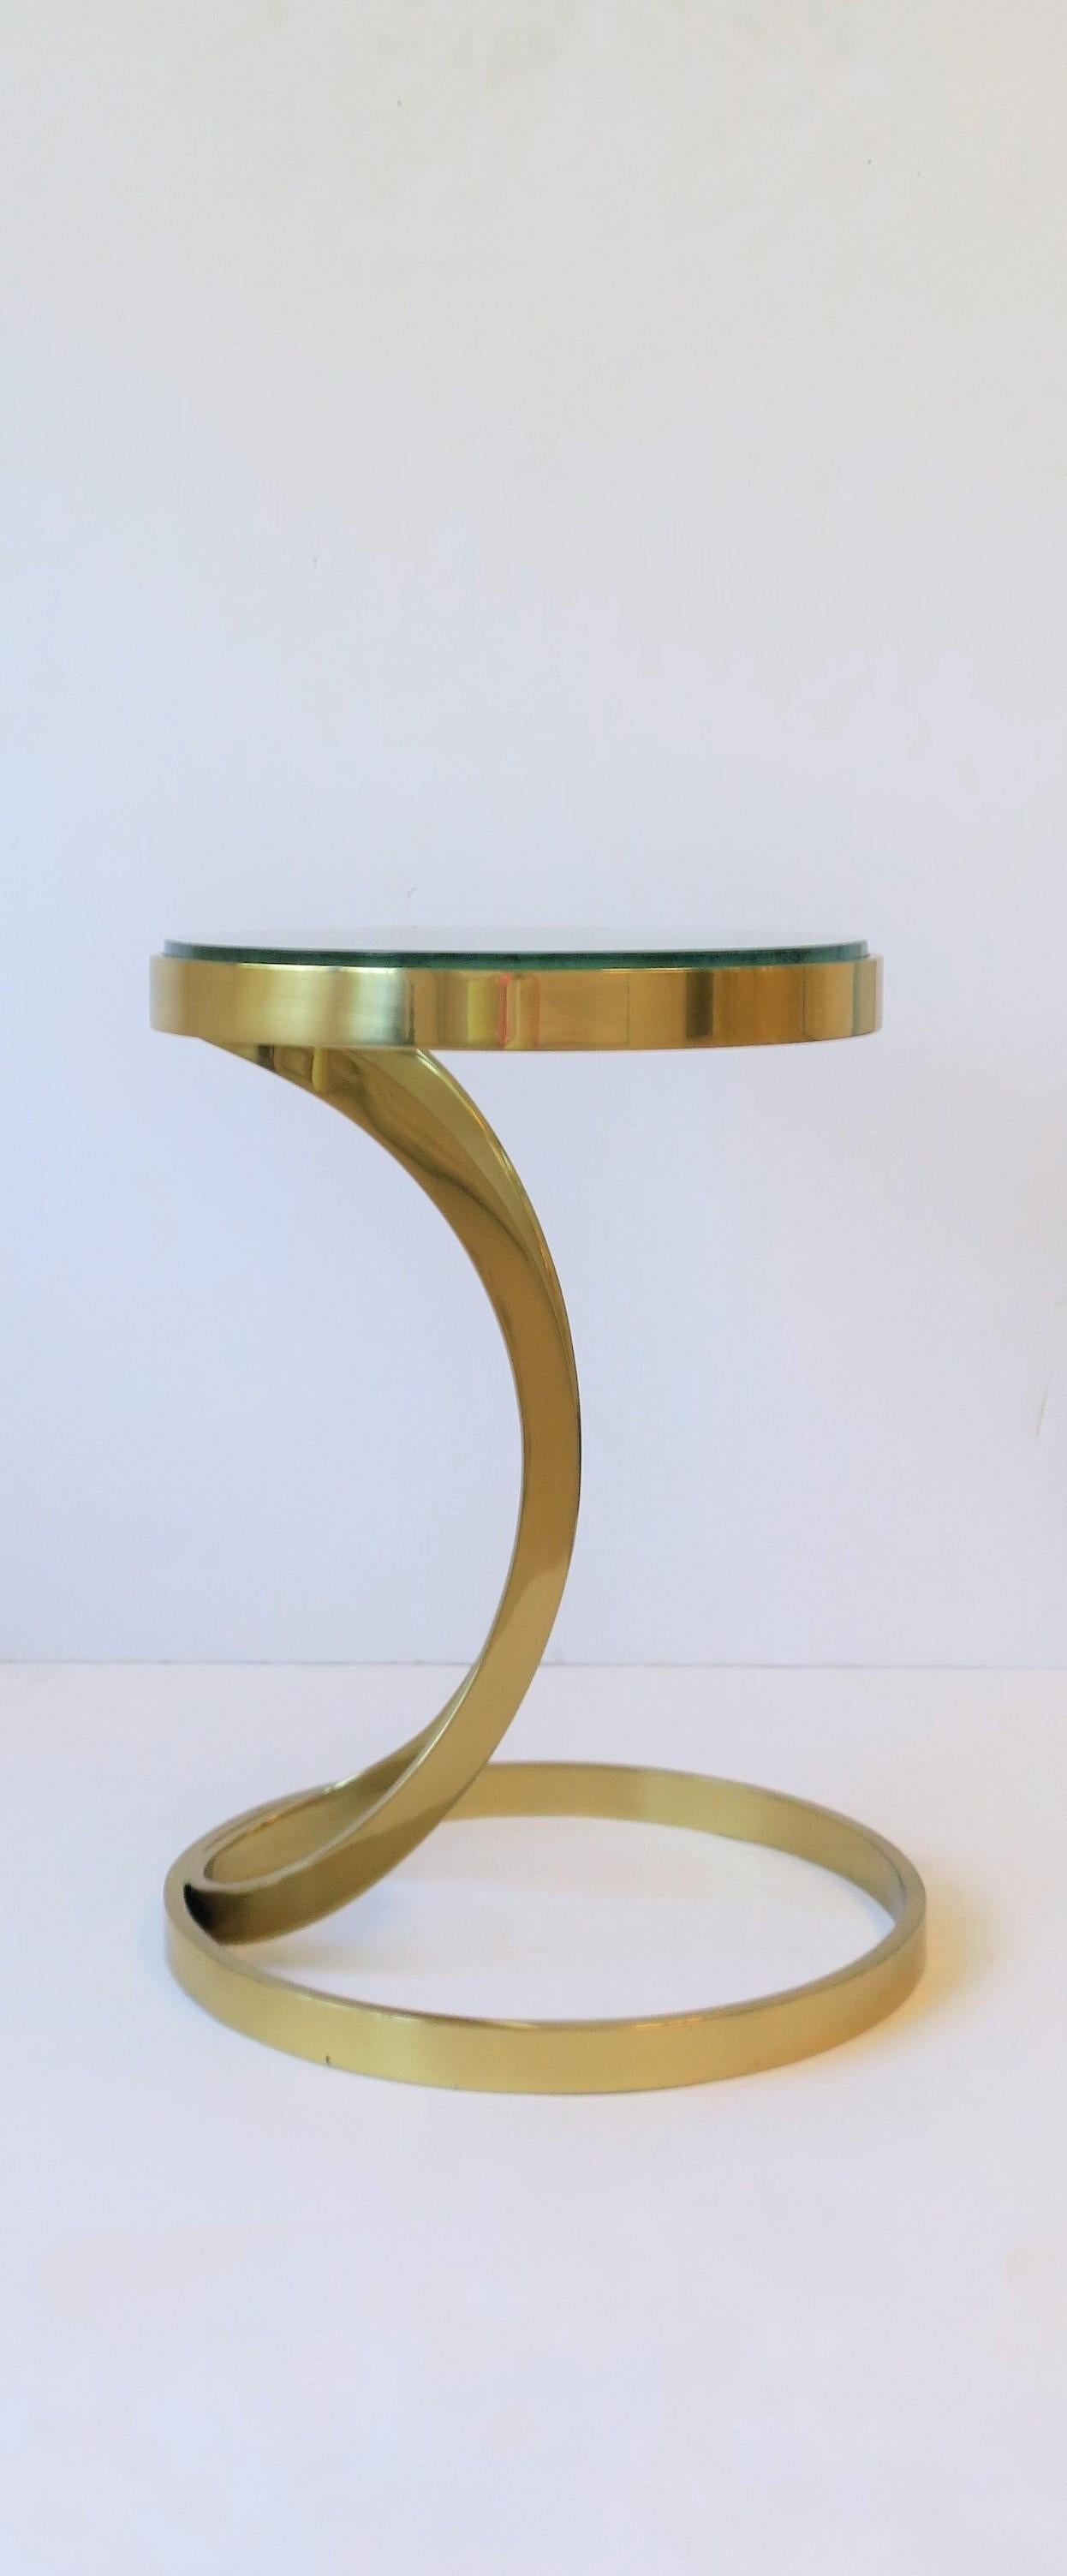 A substantial round brass and glass side/drinks table, circa early-21st century. A great table for drinks/cocktails in a convenient size. Very good condition as shown in images and video, with no chips to glass top noted. Glass top thickness